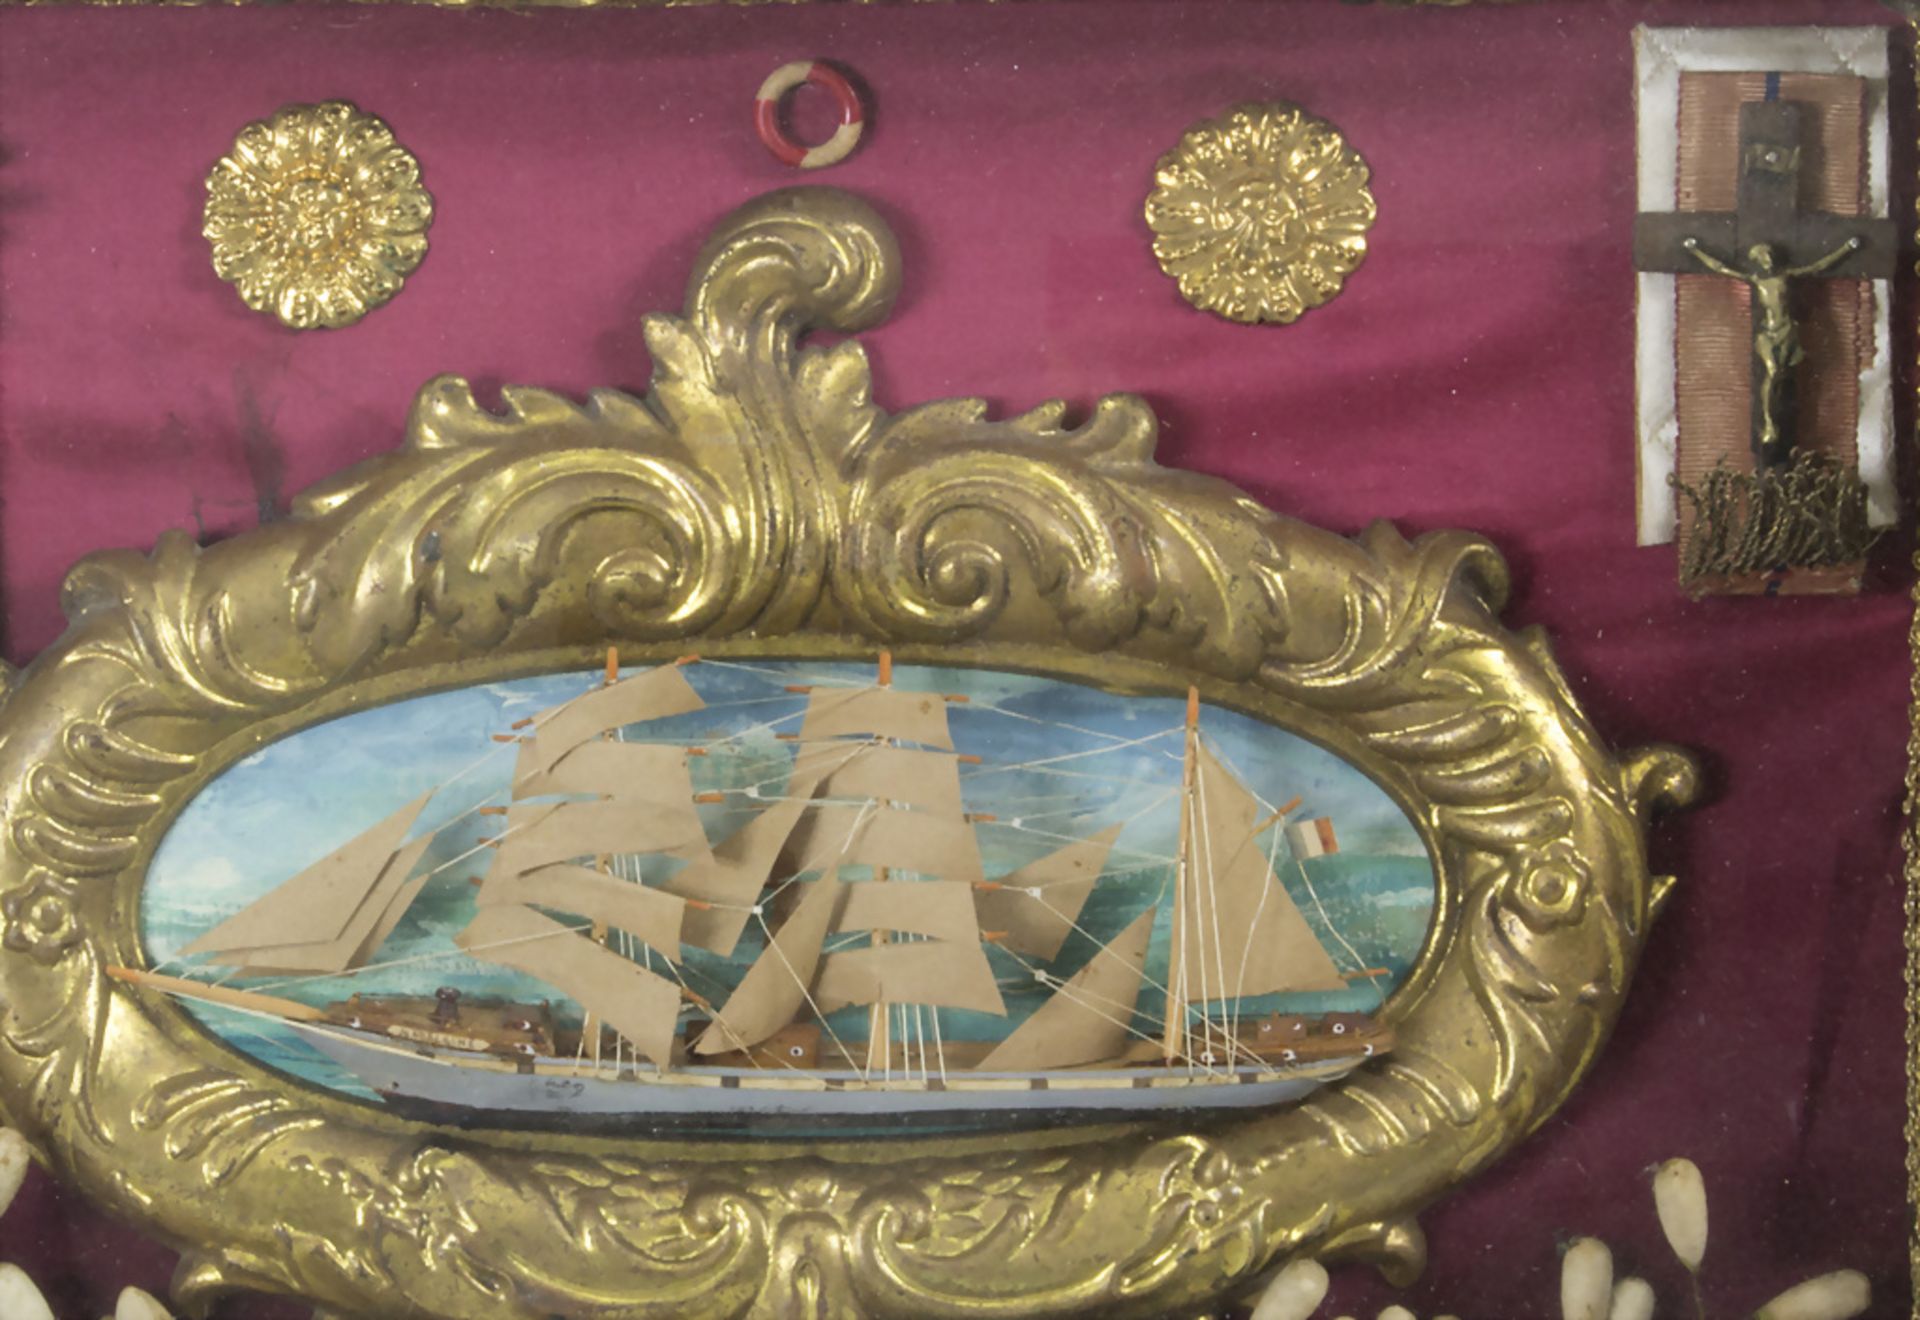 Maritimer Hausaltar mit Dreimastselger / A maritime house altar with a three-masted sailor, 19. Jh. - Image 3 of 4